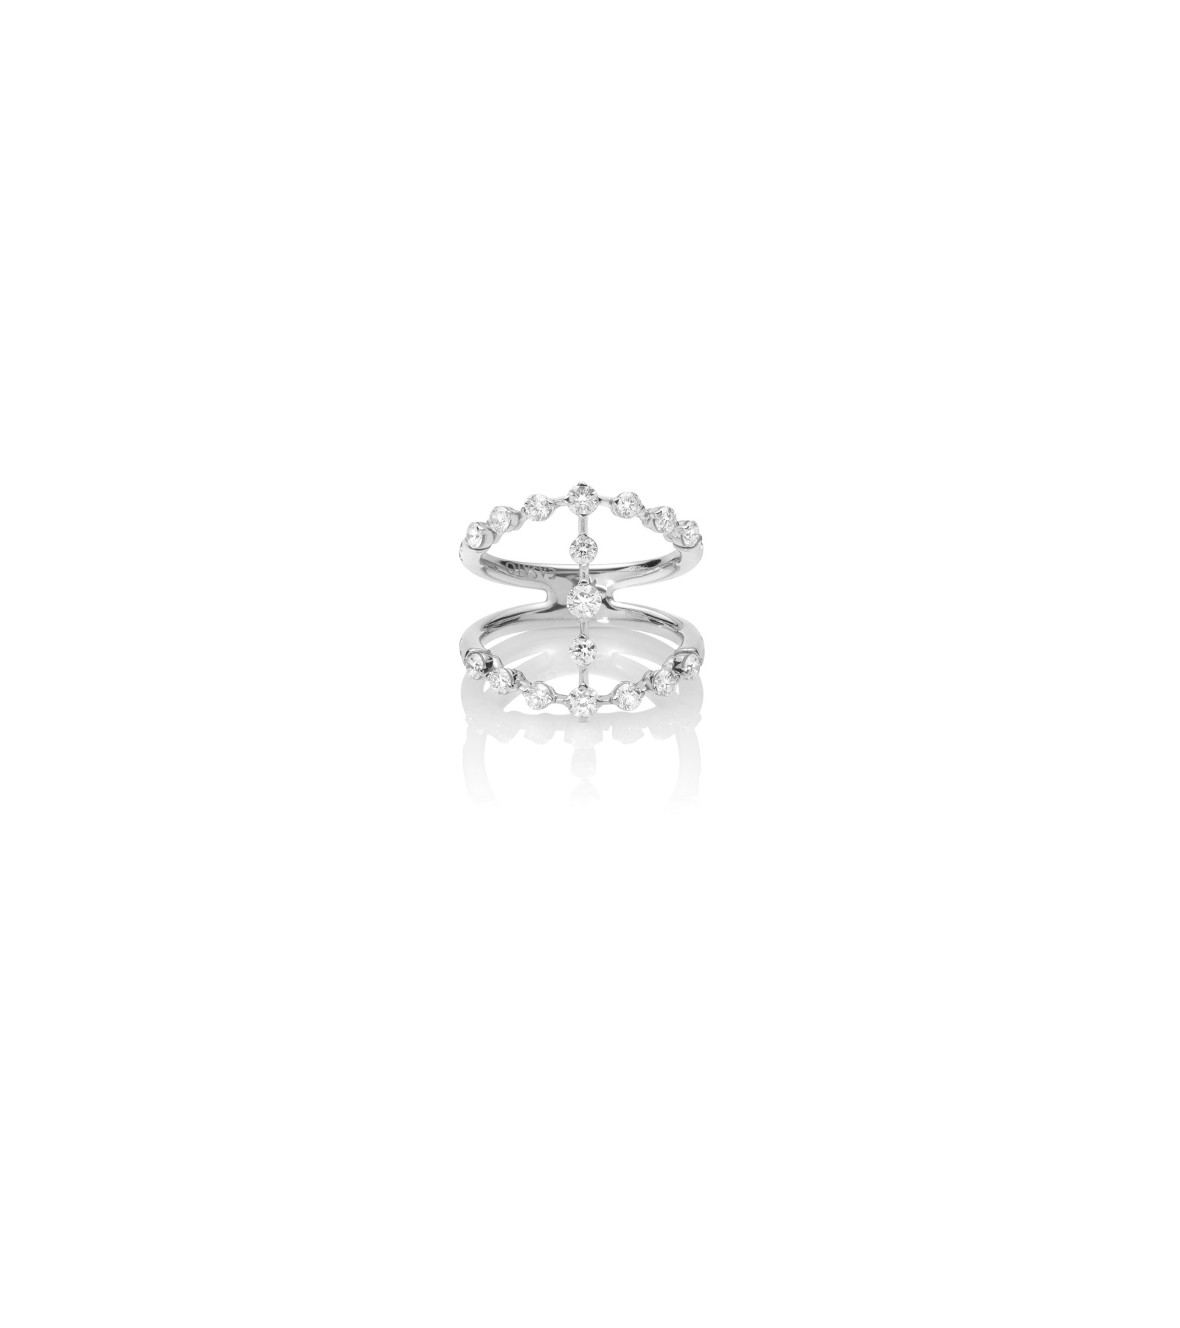 White Gold Ring with White Diamonds MX1180BT by Casato